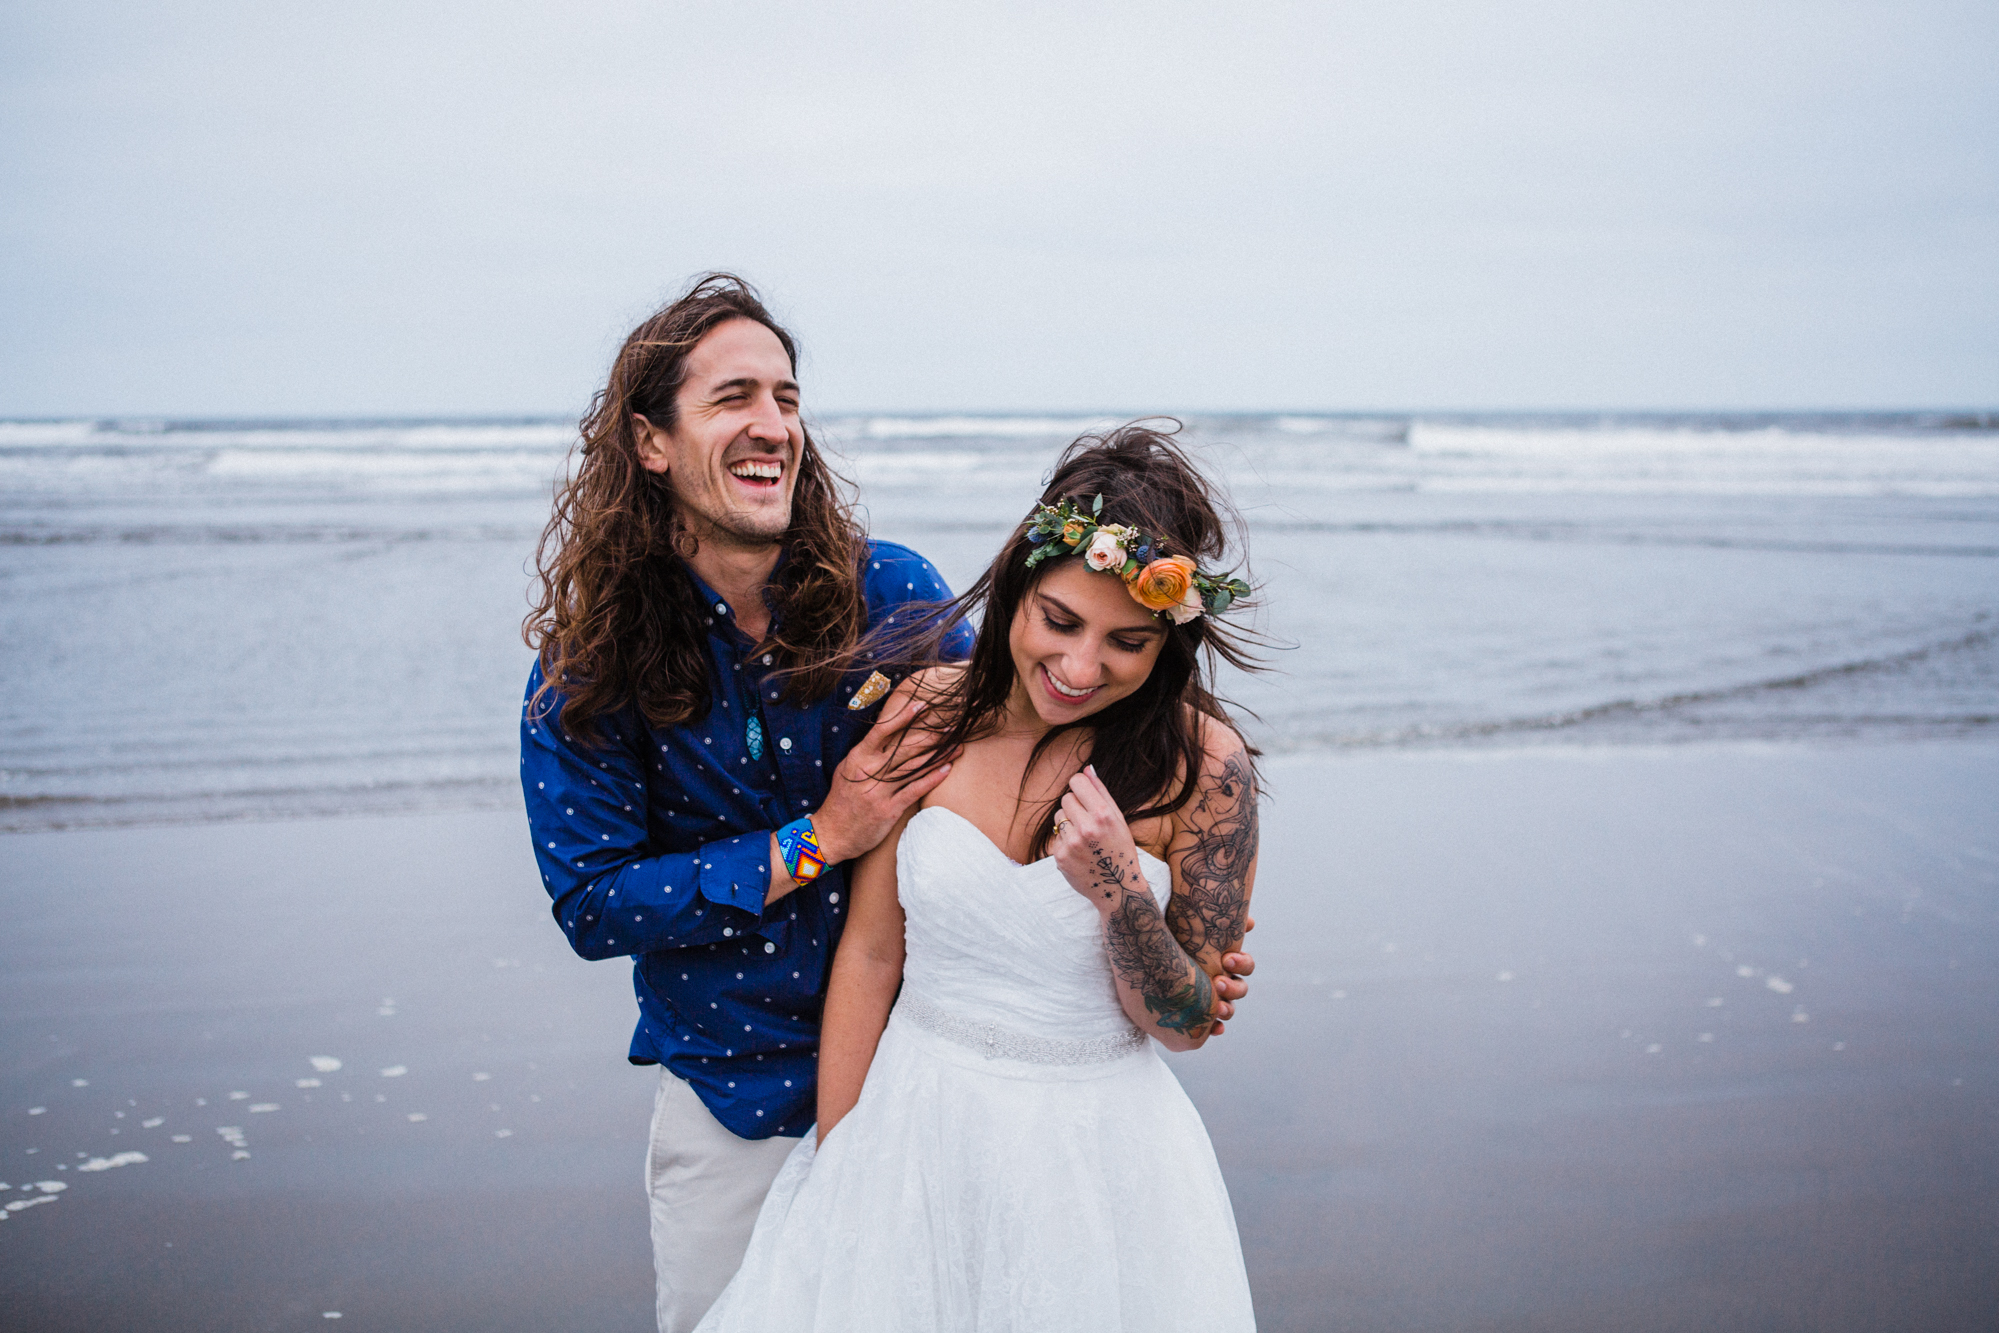 A man and a woman laugh together on the beach with waves crashing behind them